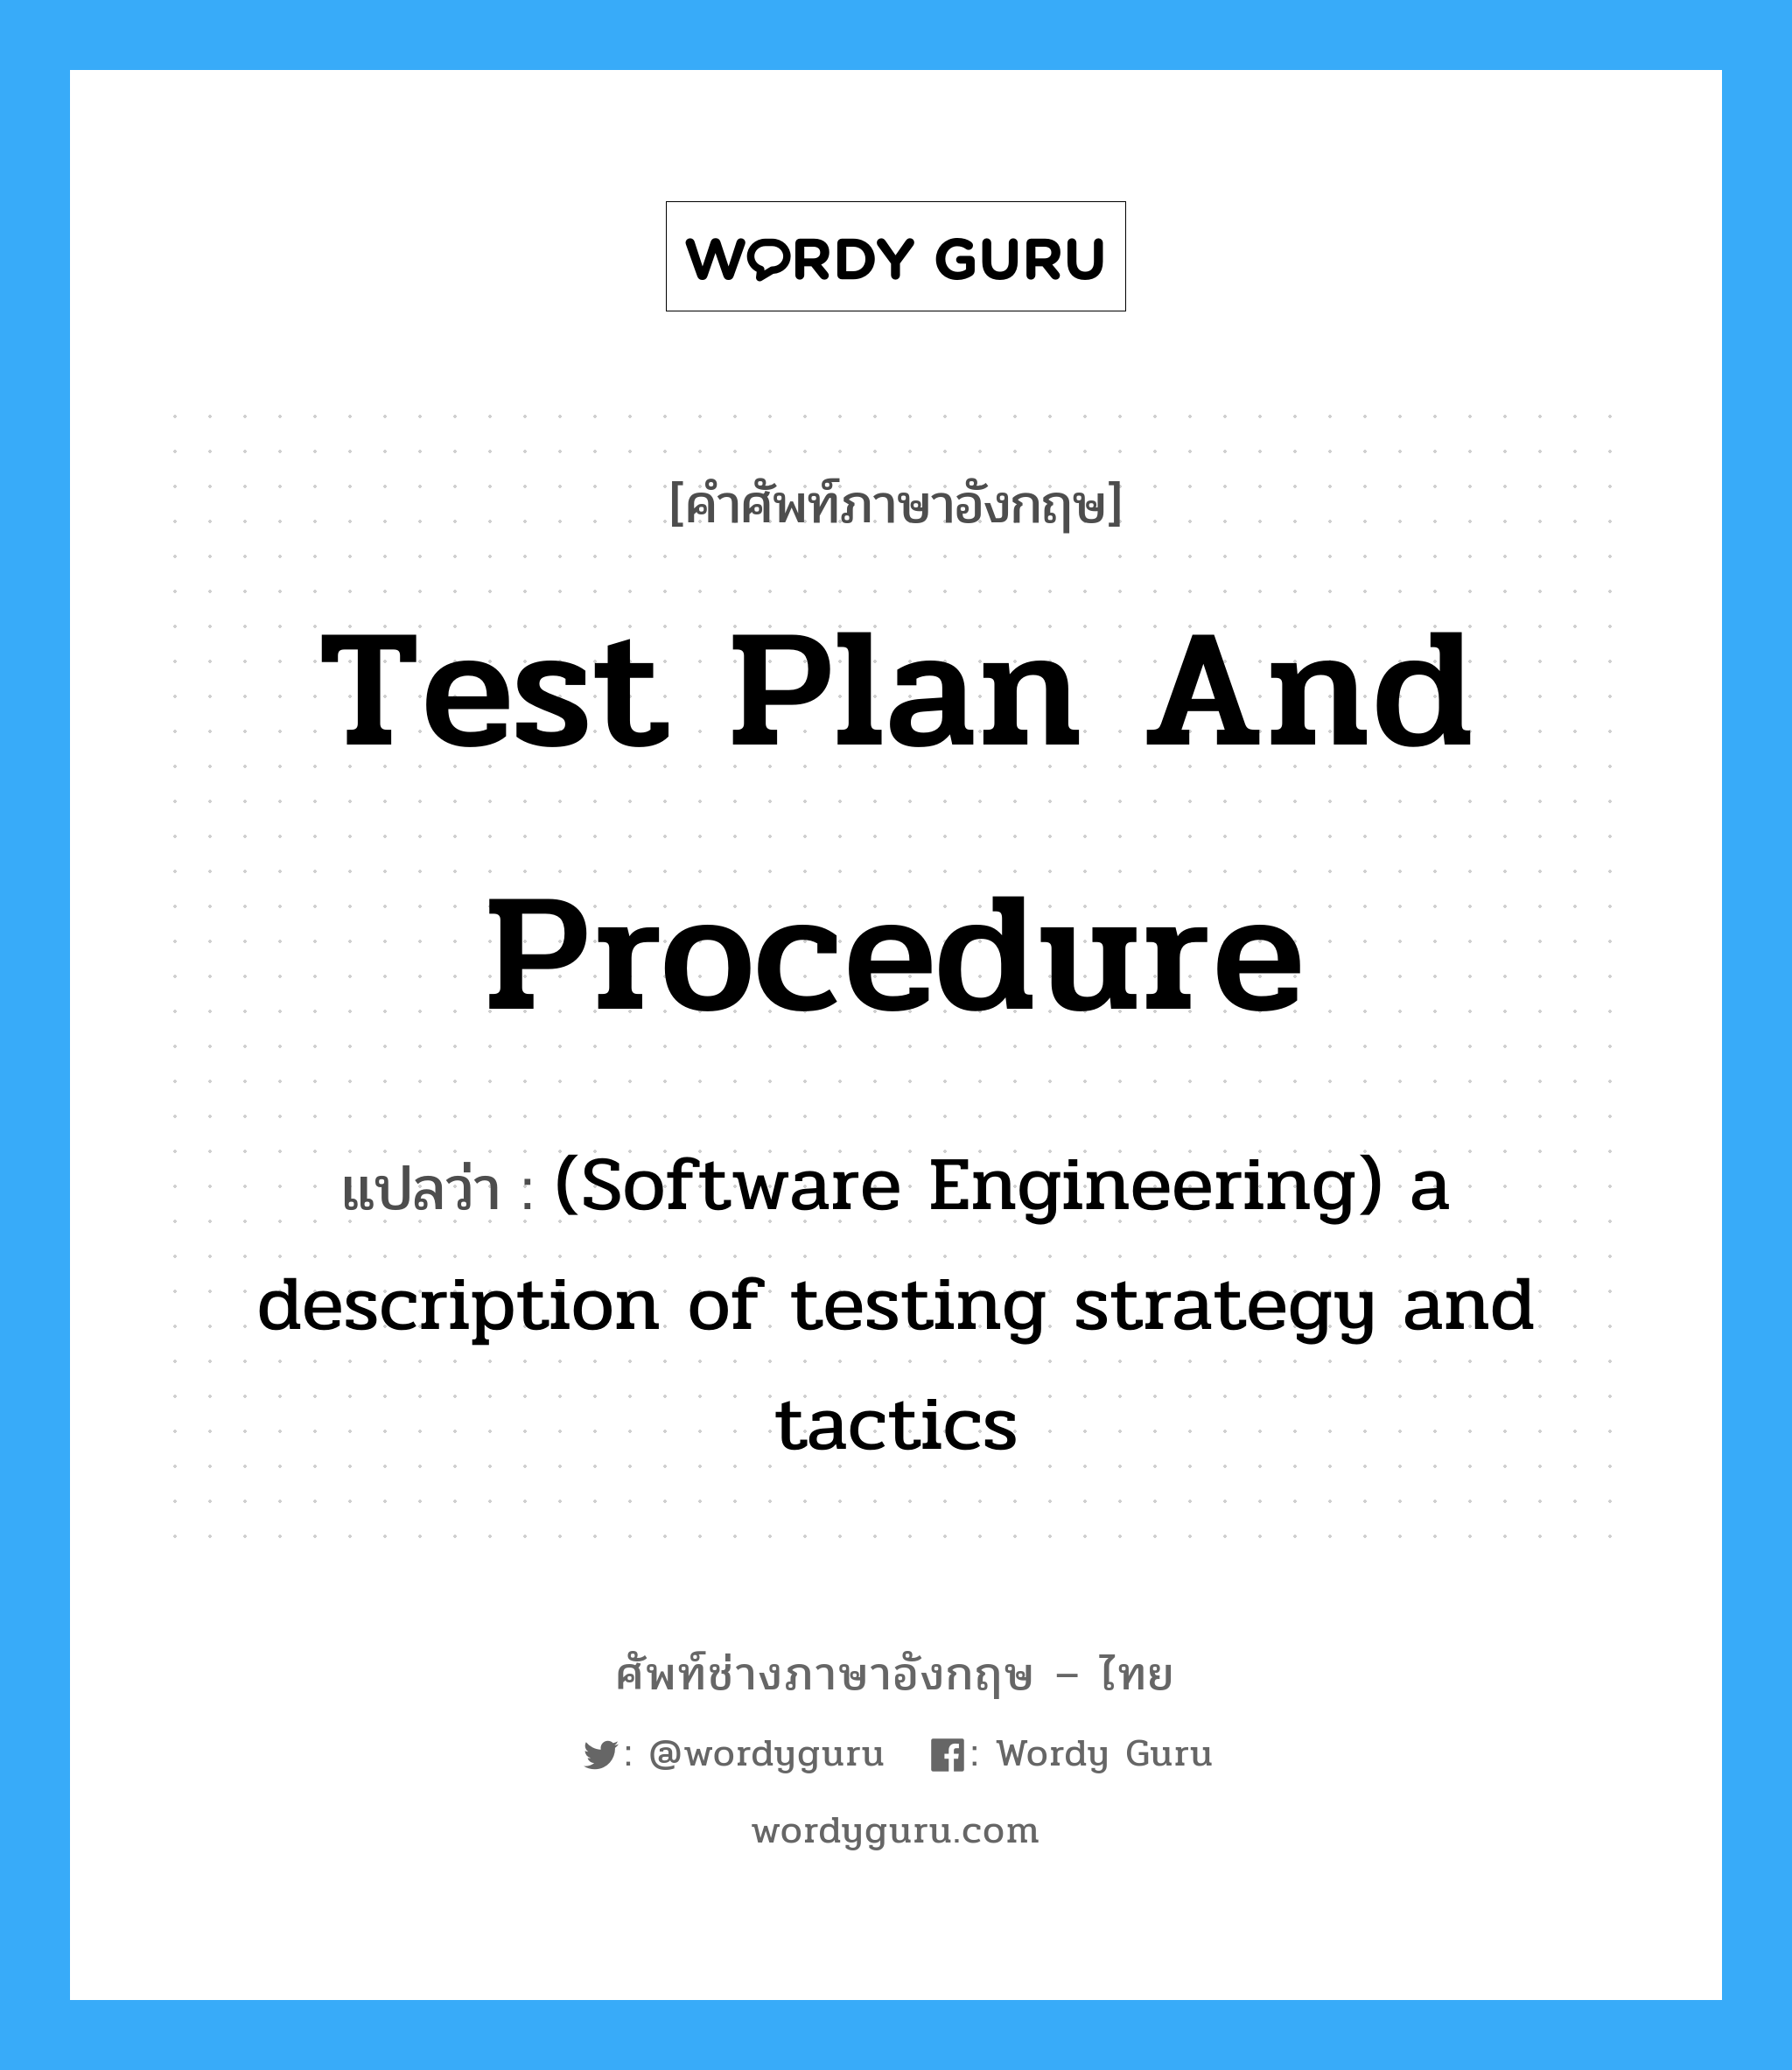 (Software Engineering) a description of testing strategy and tactics ภาษาอังกฤษ?, คำศัพท์ช่างภาษาอังกฤษ - ไทย (Software Engineering) a description of testing strategy and tactics คำศัพท์ภาษาอังกฤษ (Software Engineering) a description of testing strategy and tactics แปลว่า Test plan and procedure